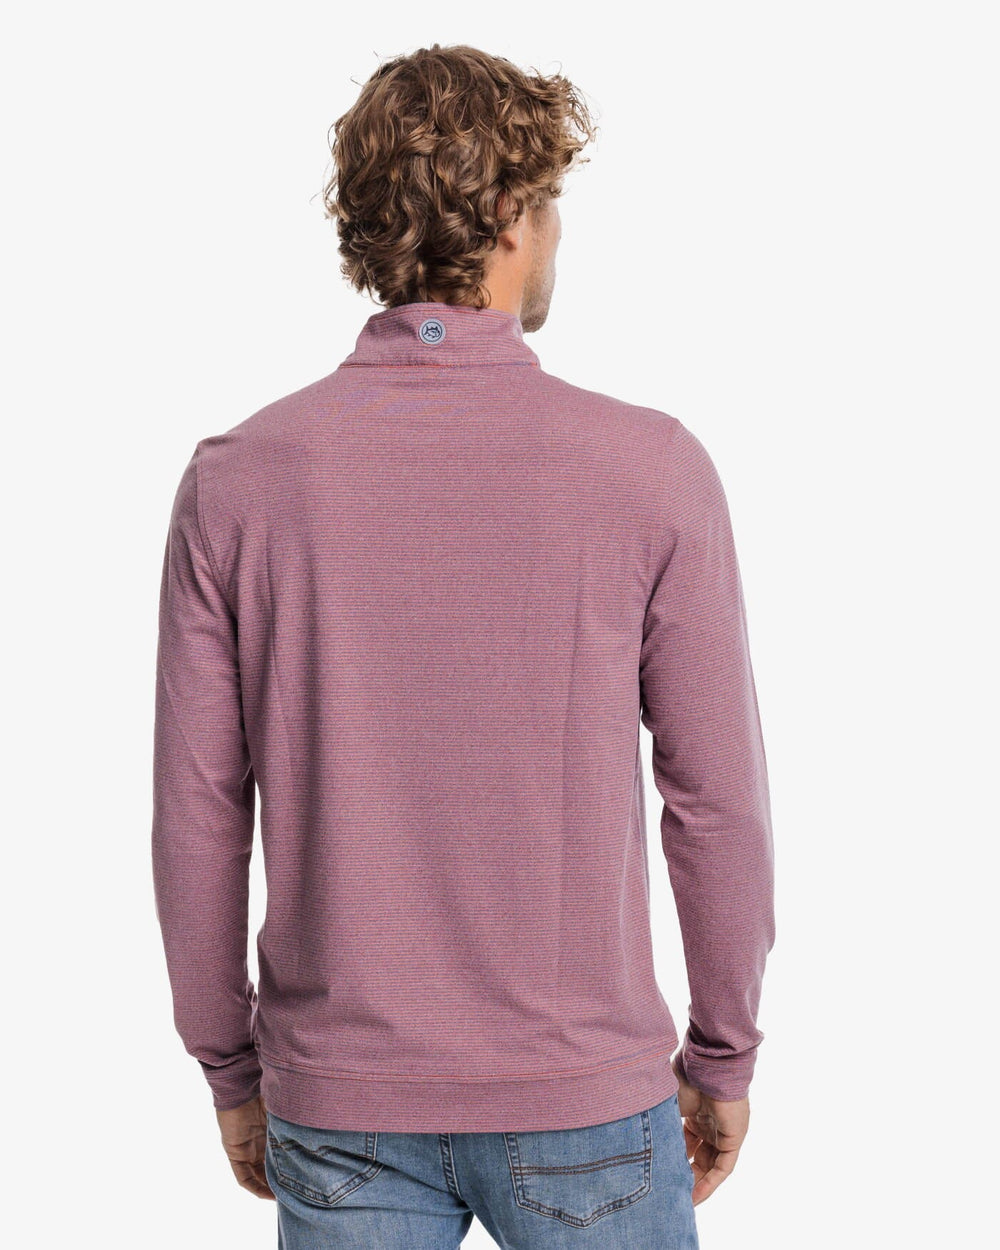 The back view of the Southern Tide Cruiser Heather Micro-Stripe Performance Quarter Zip Pullover by Southern Tide - Heather Dusty Coral